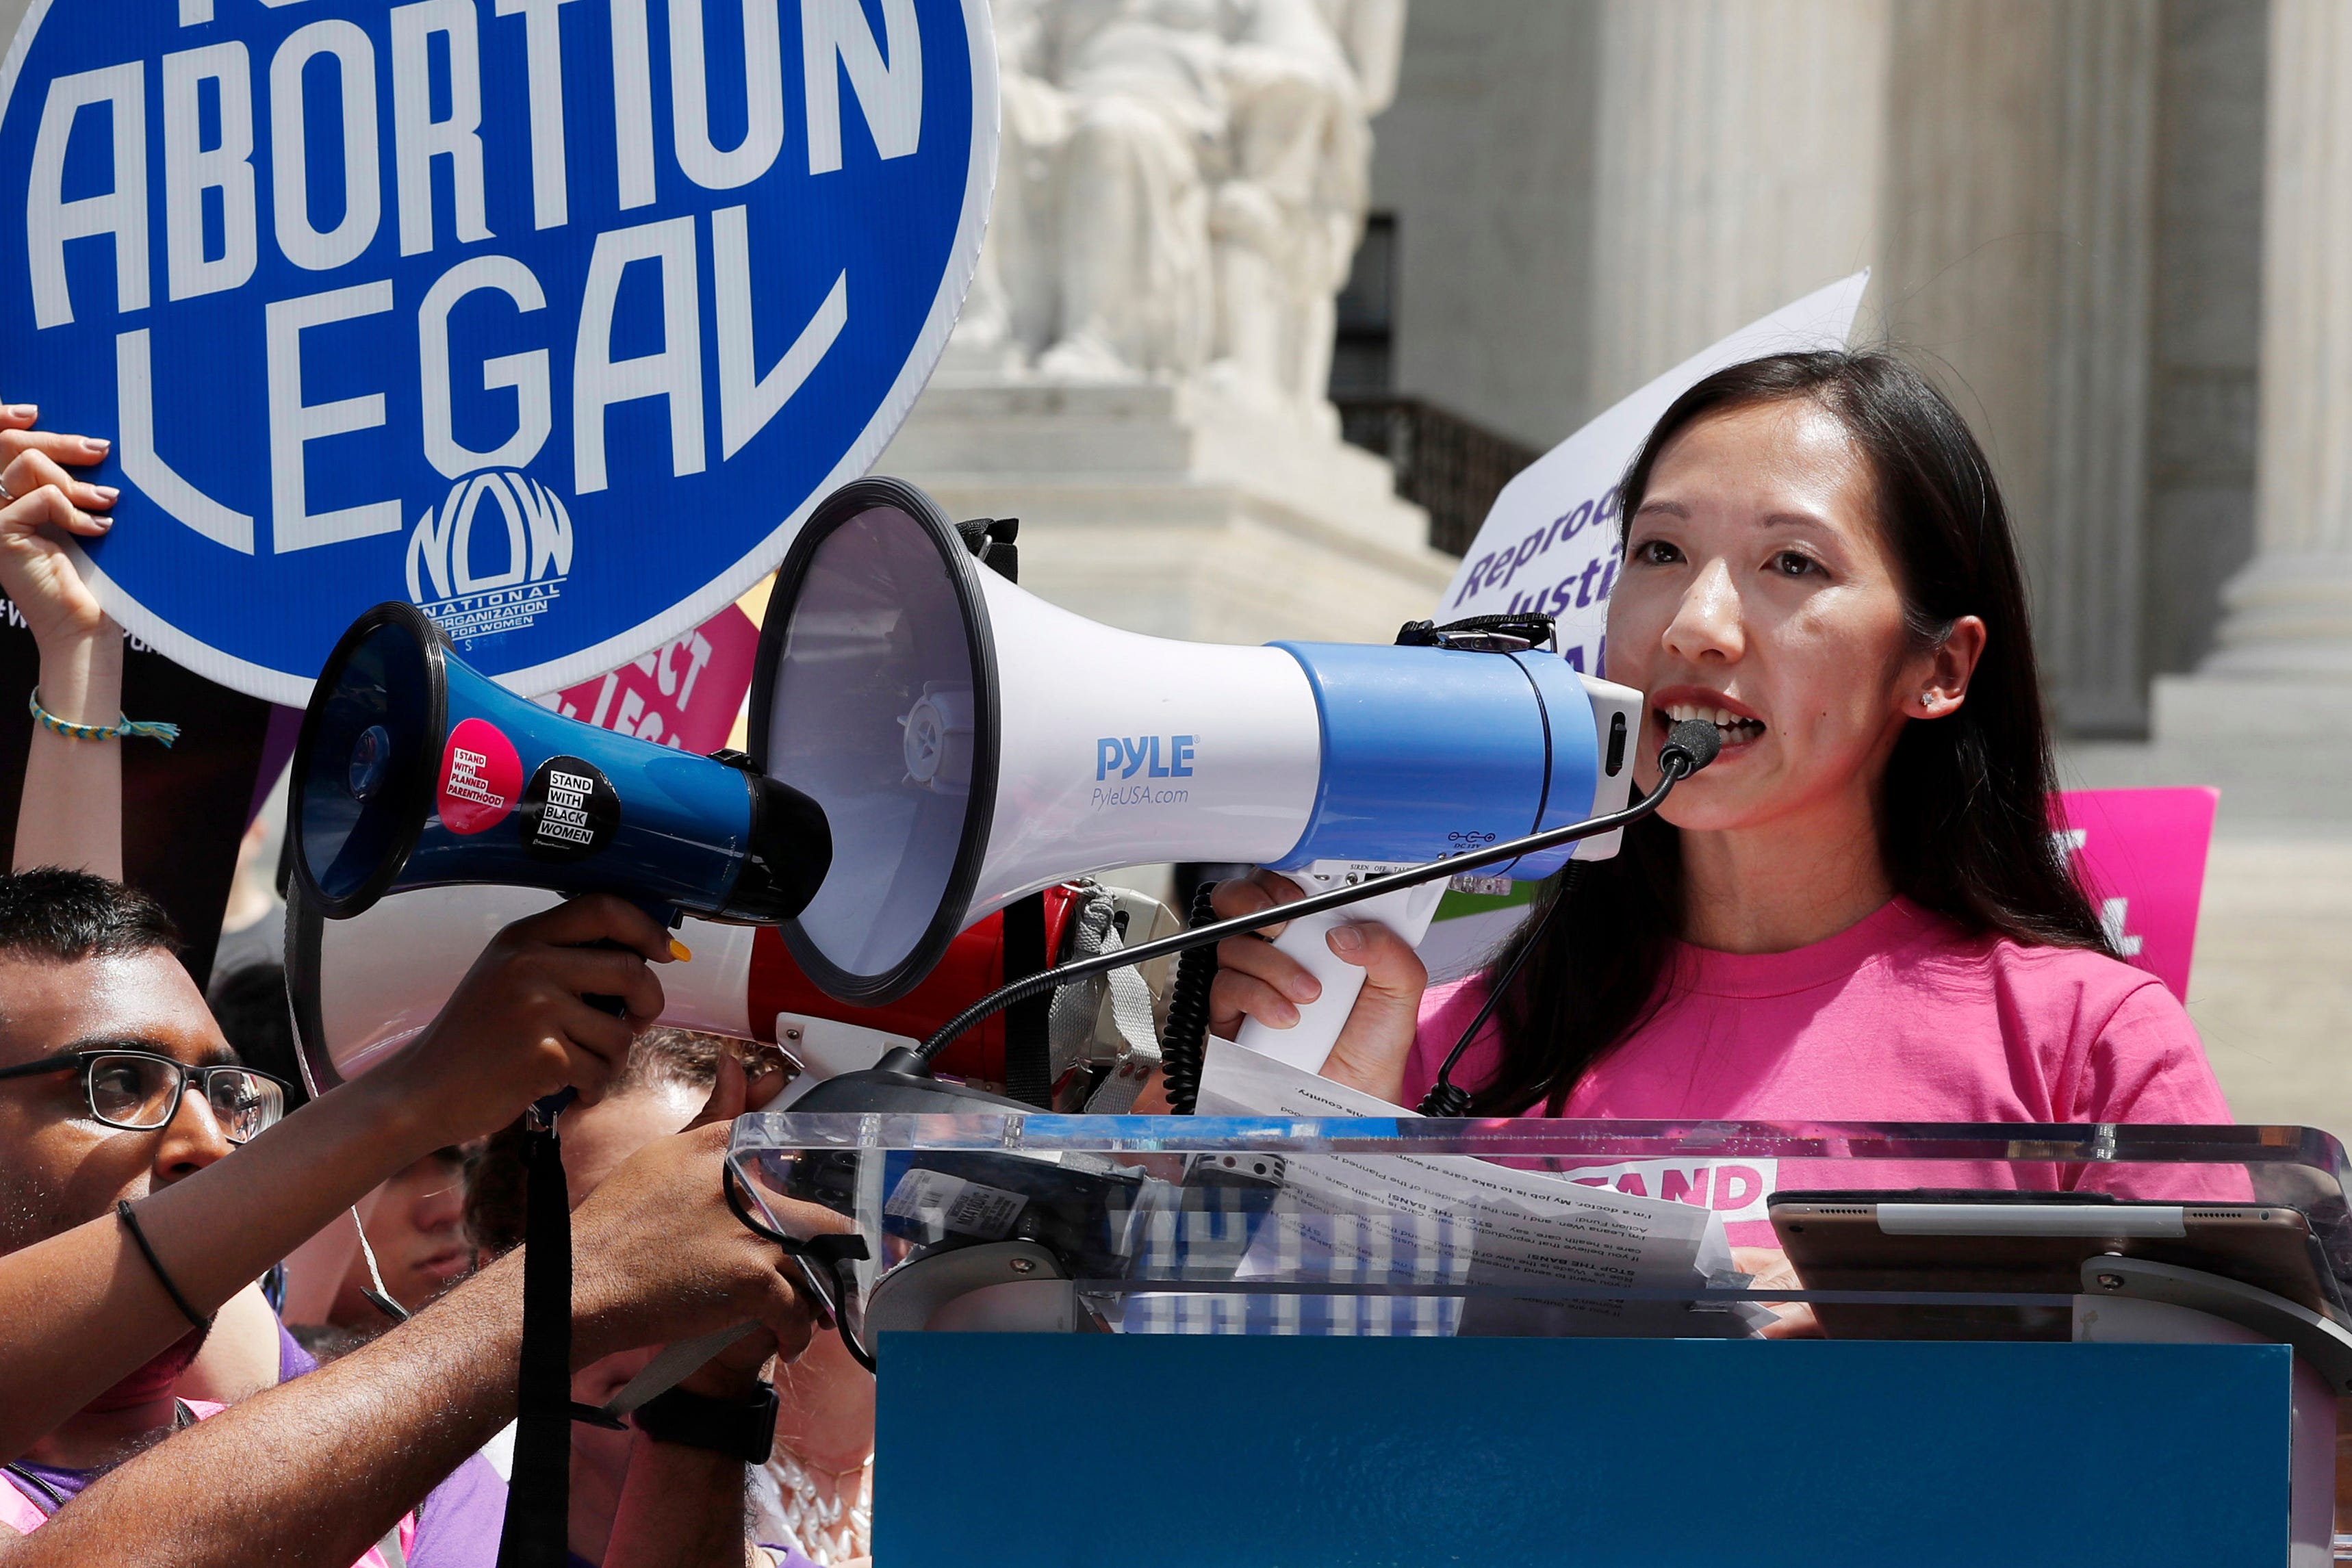 Planned Parenthood President Leana Wen speaks during a protest against abortion bans outside the Supreme Court in Washington on May 21, 2019.